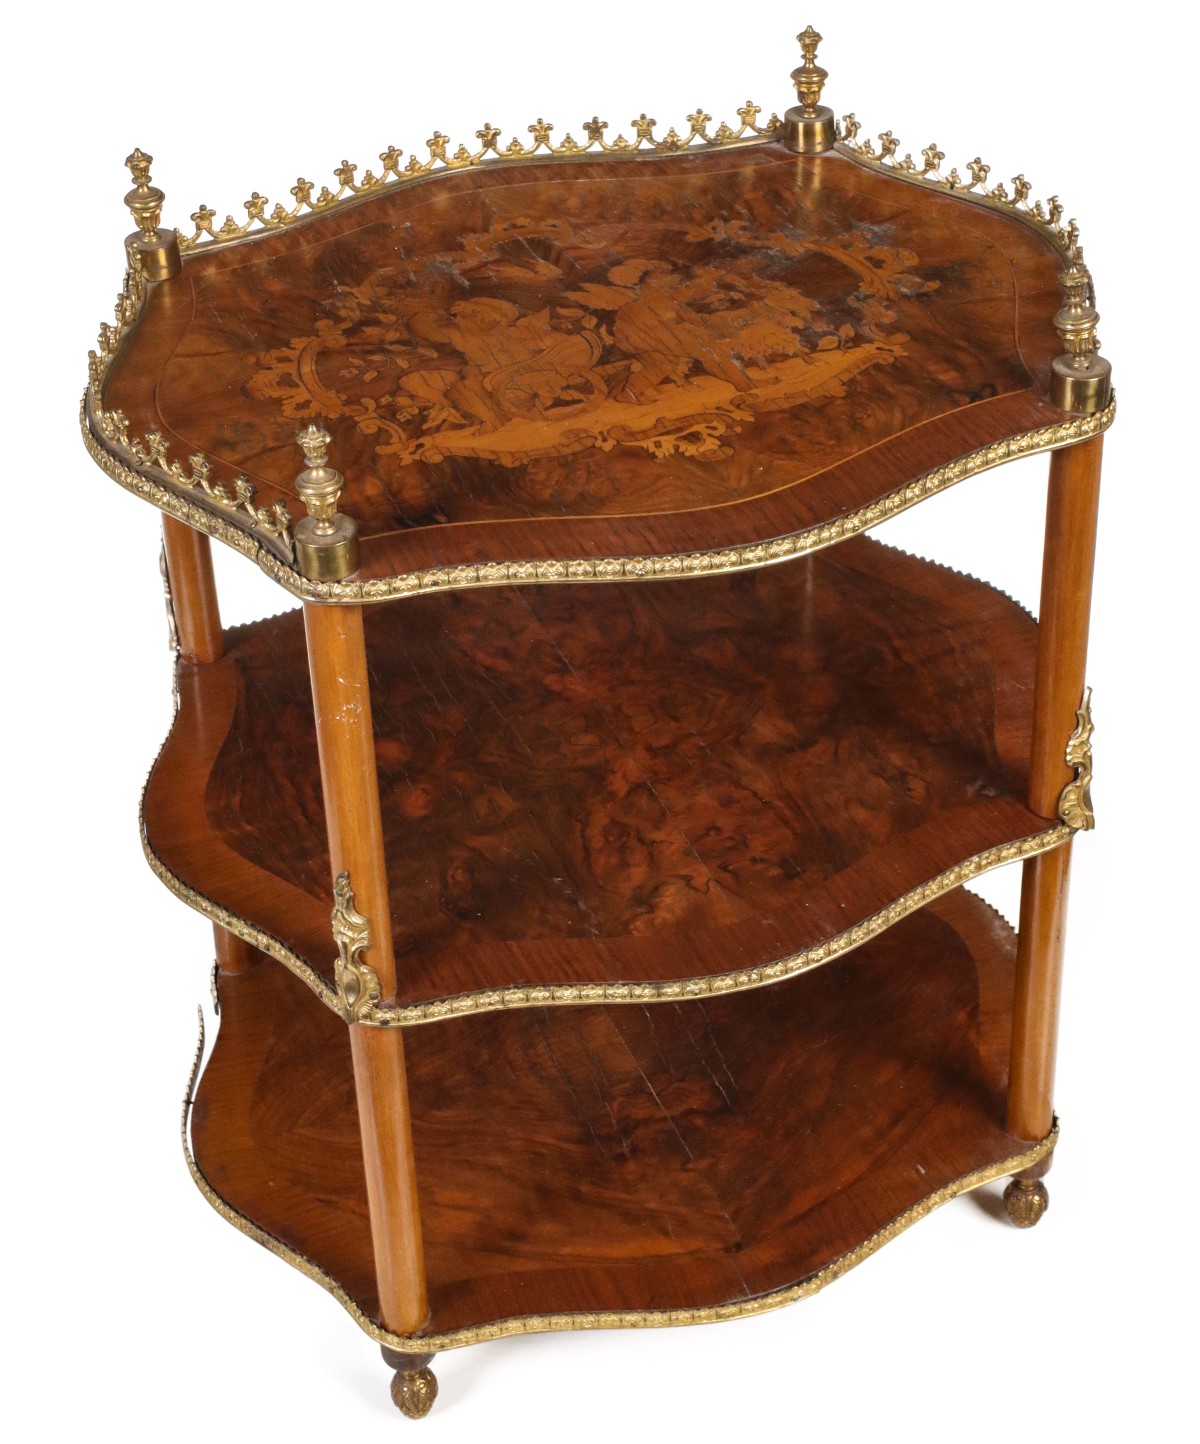 A NAPOLEON III MARQUETRY ETAGERE SIDE TABLE